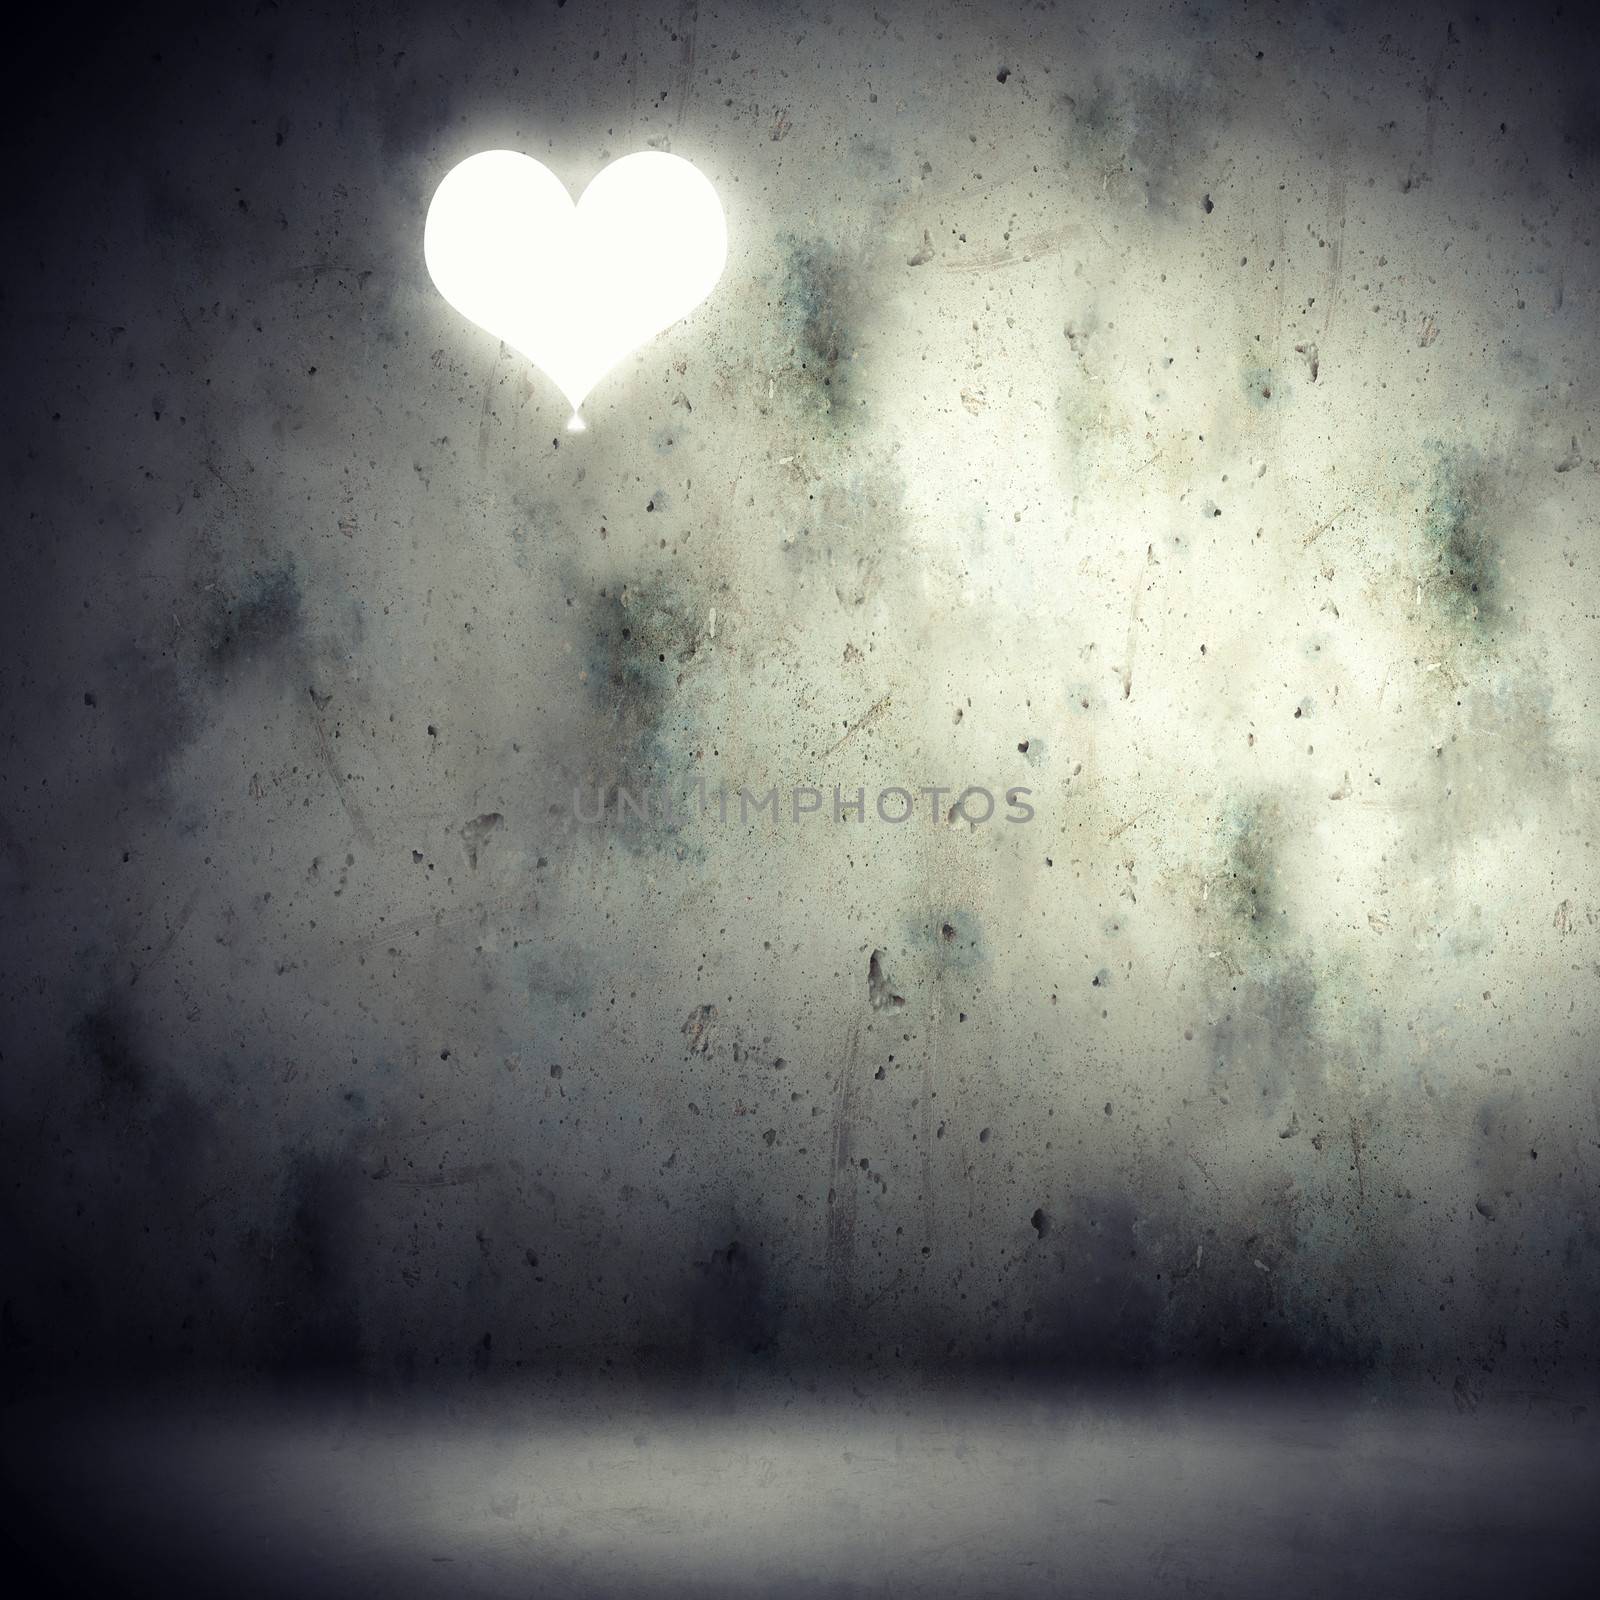 Background image with heart illustration by sergey_nivens